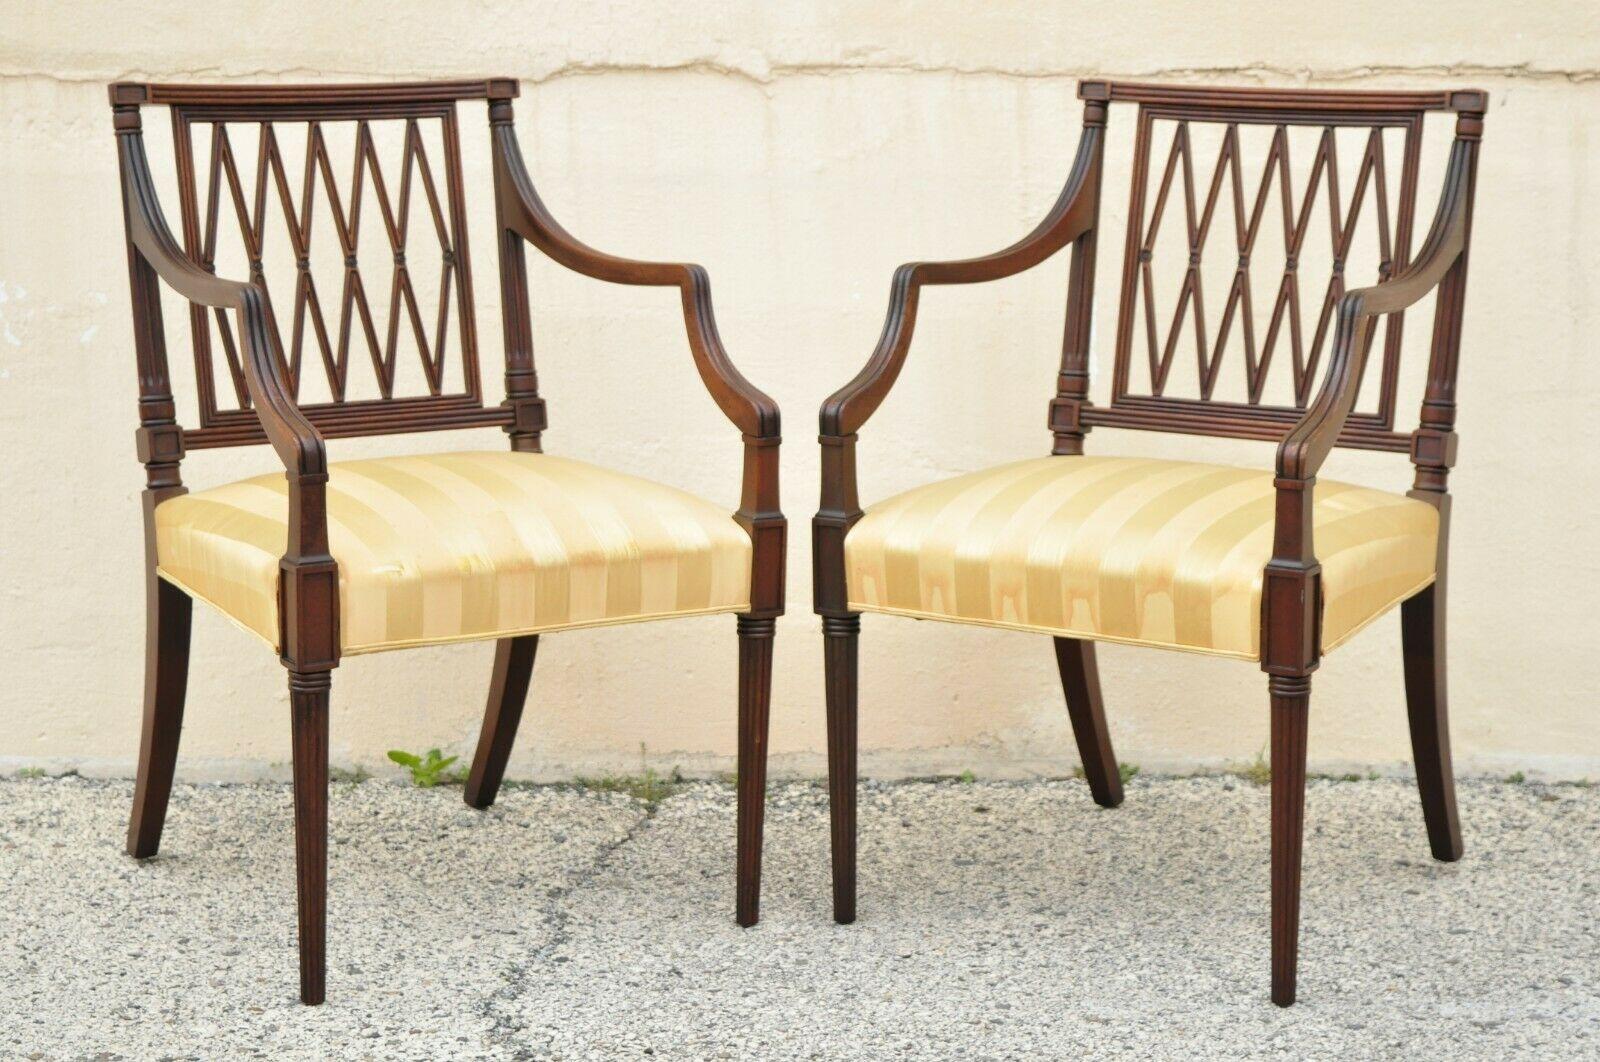 Antique mahogany Lattice Back Hepplewhite style dining chairs - Set of 6. Item features (2) arm chairs, (4) side chairs, carved lattice backs, tapered legs, very nice vintage set, quality American craftsmanship. Circa Early to Mid